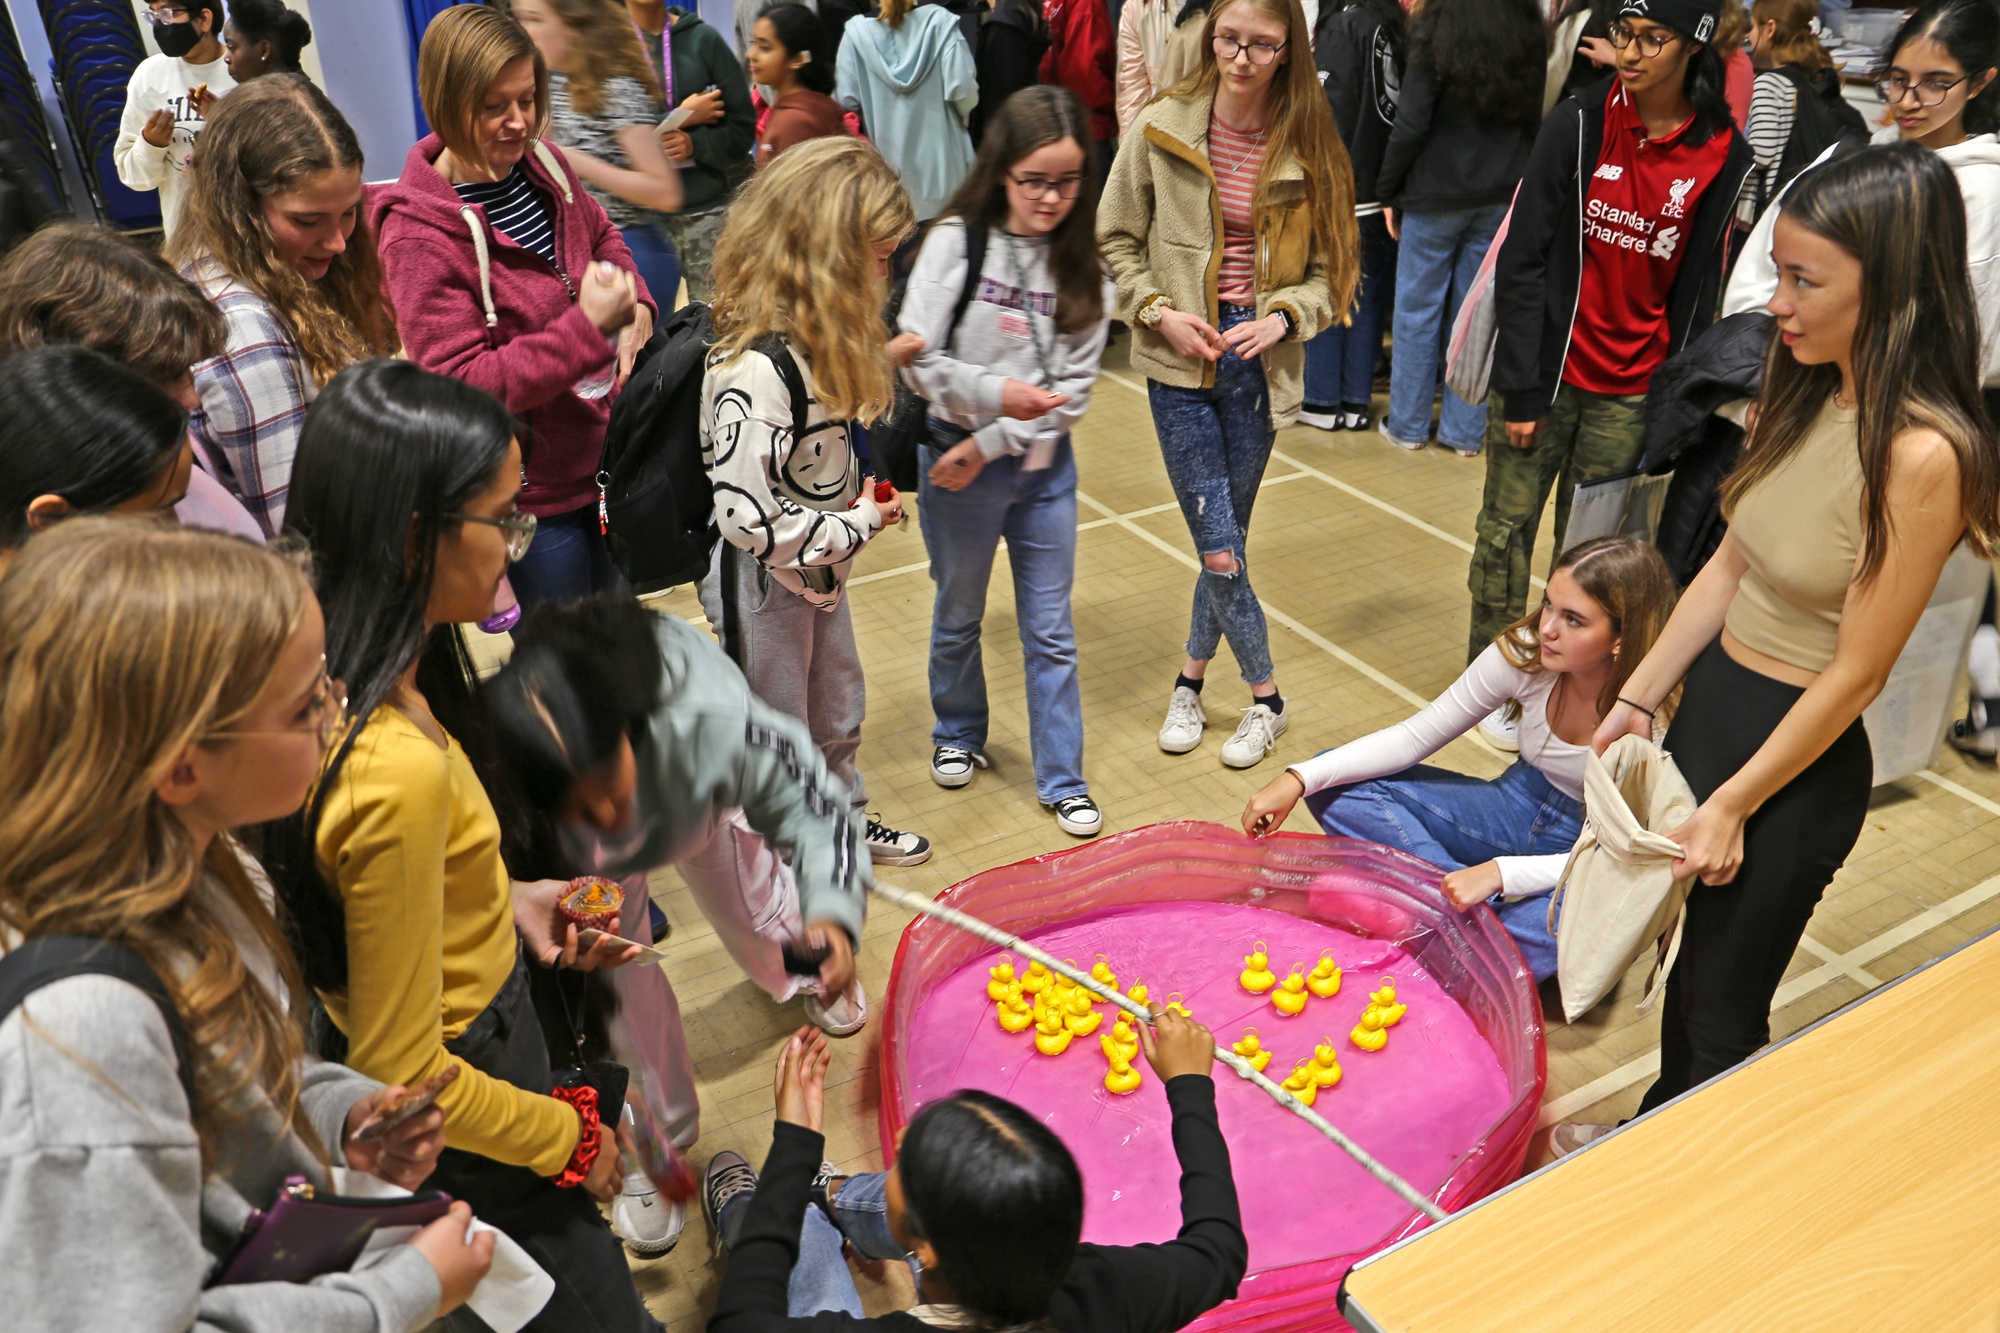 Students playing hook-a-duck